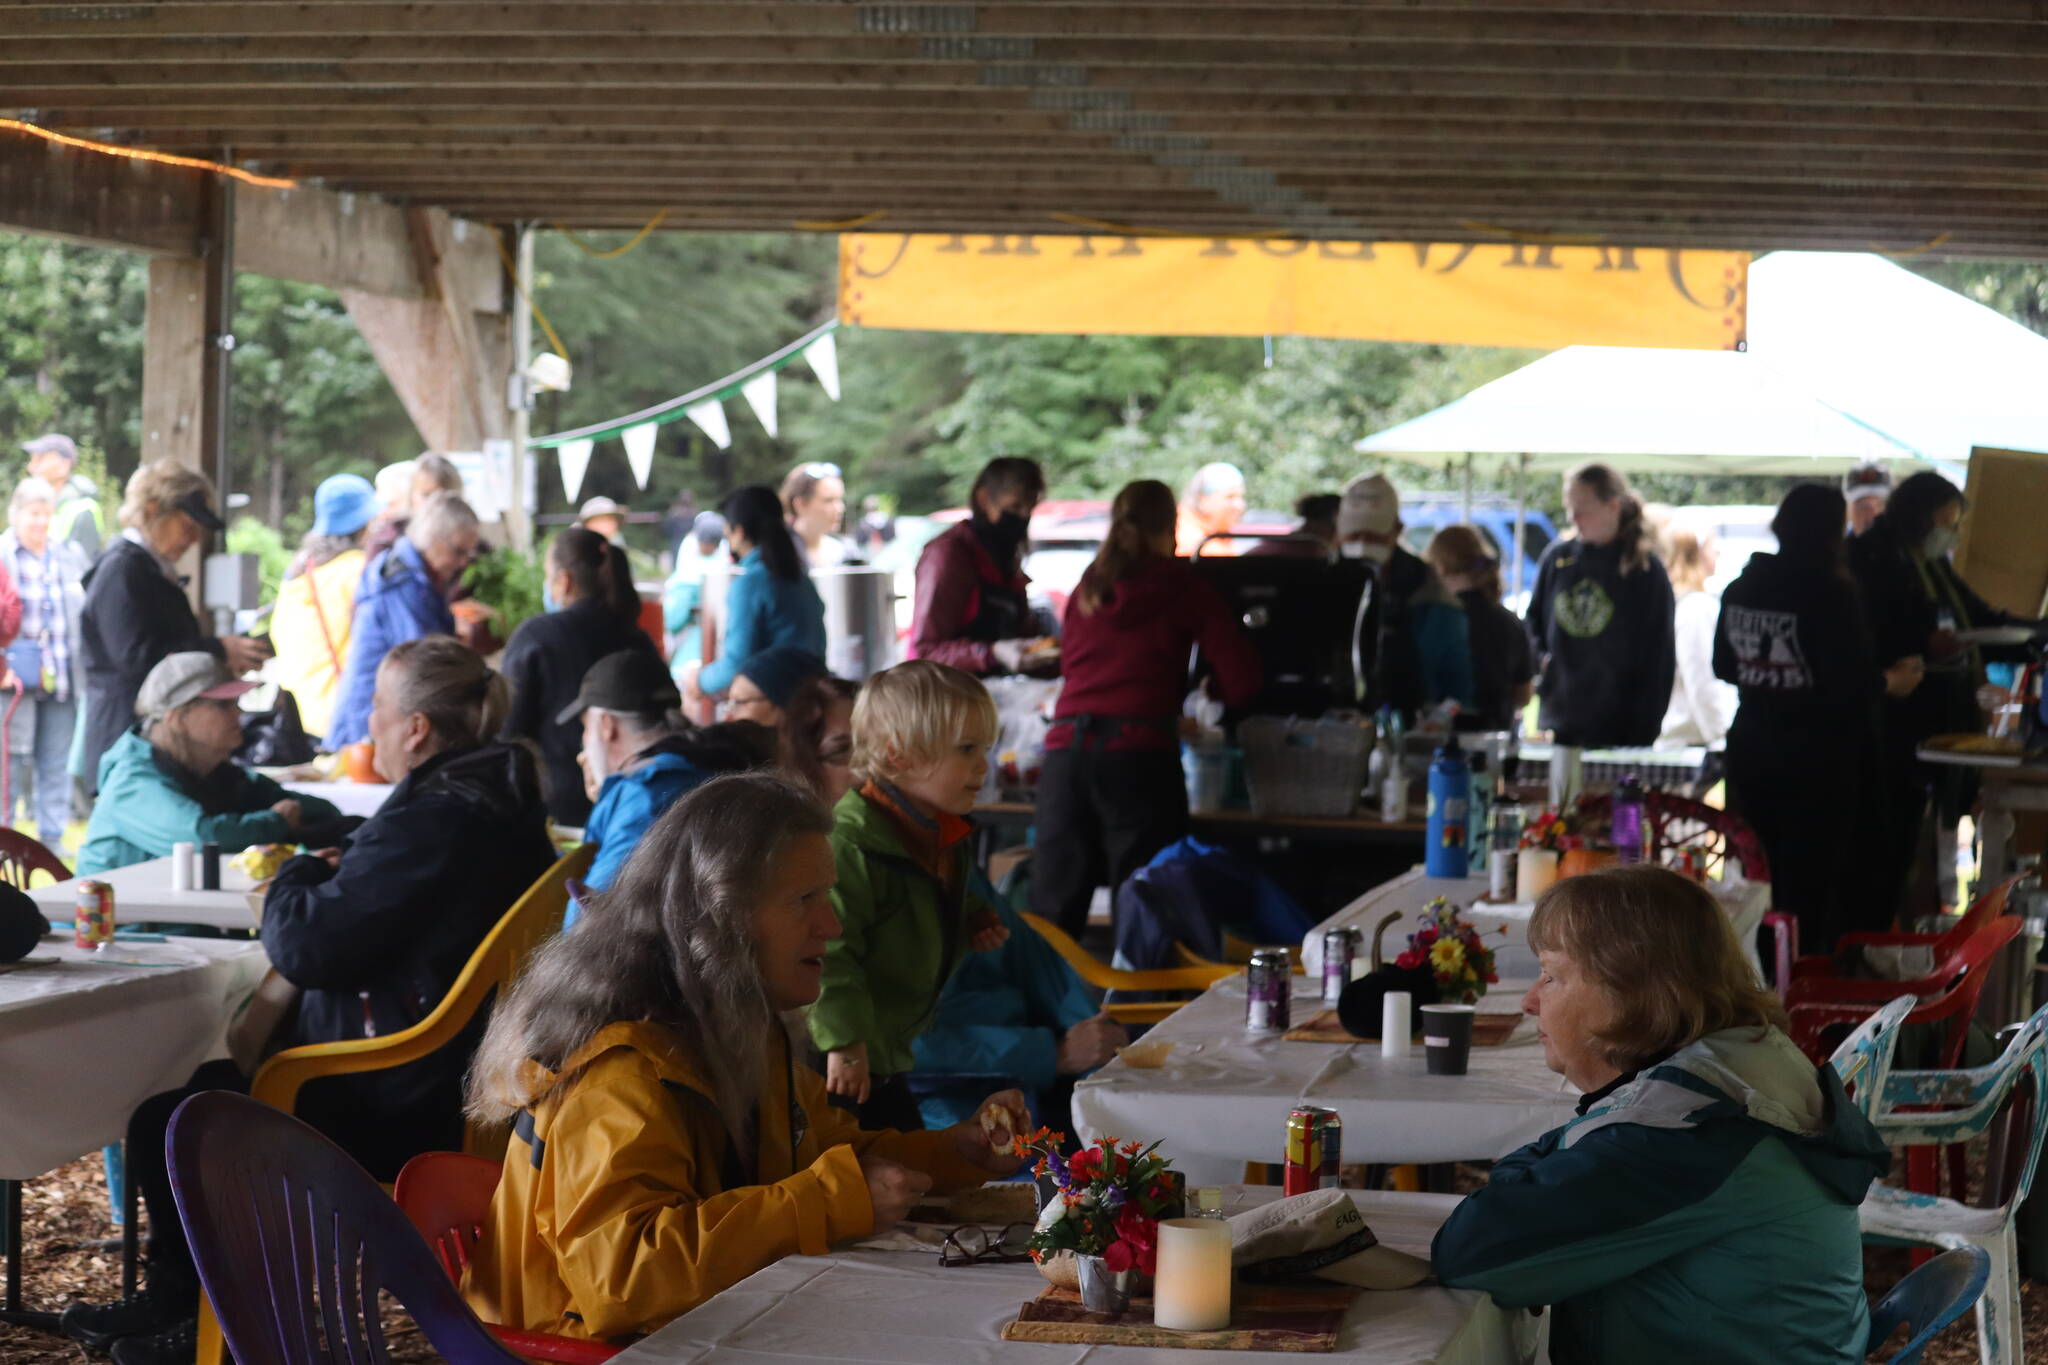 Despite the morning rain, there was a large turnout on Saturday for the 28th Annual Juneau Community Garden Harvest Fair, which featured concessions and a bake sale. (Jonson Kuhn / Juneau Empire)